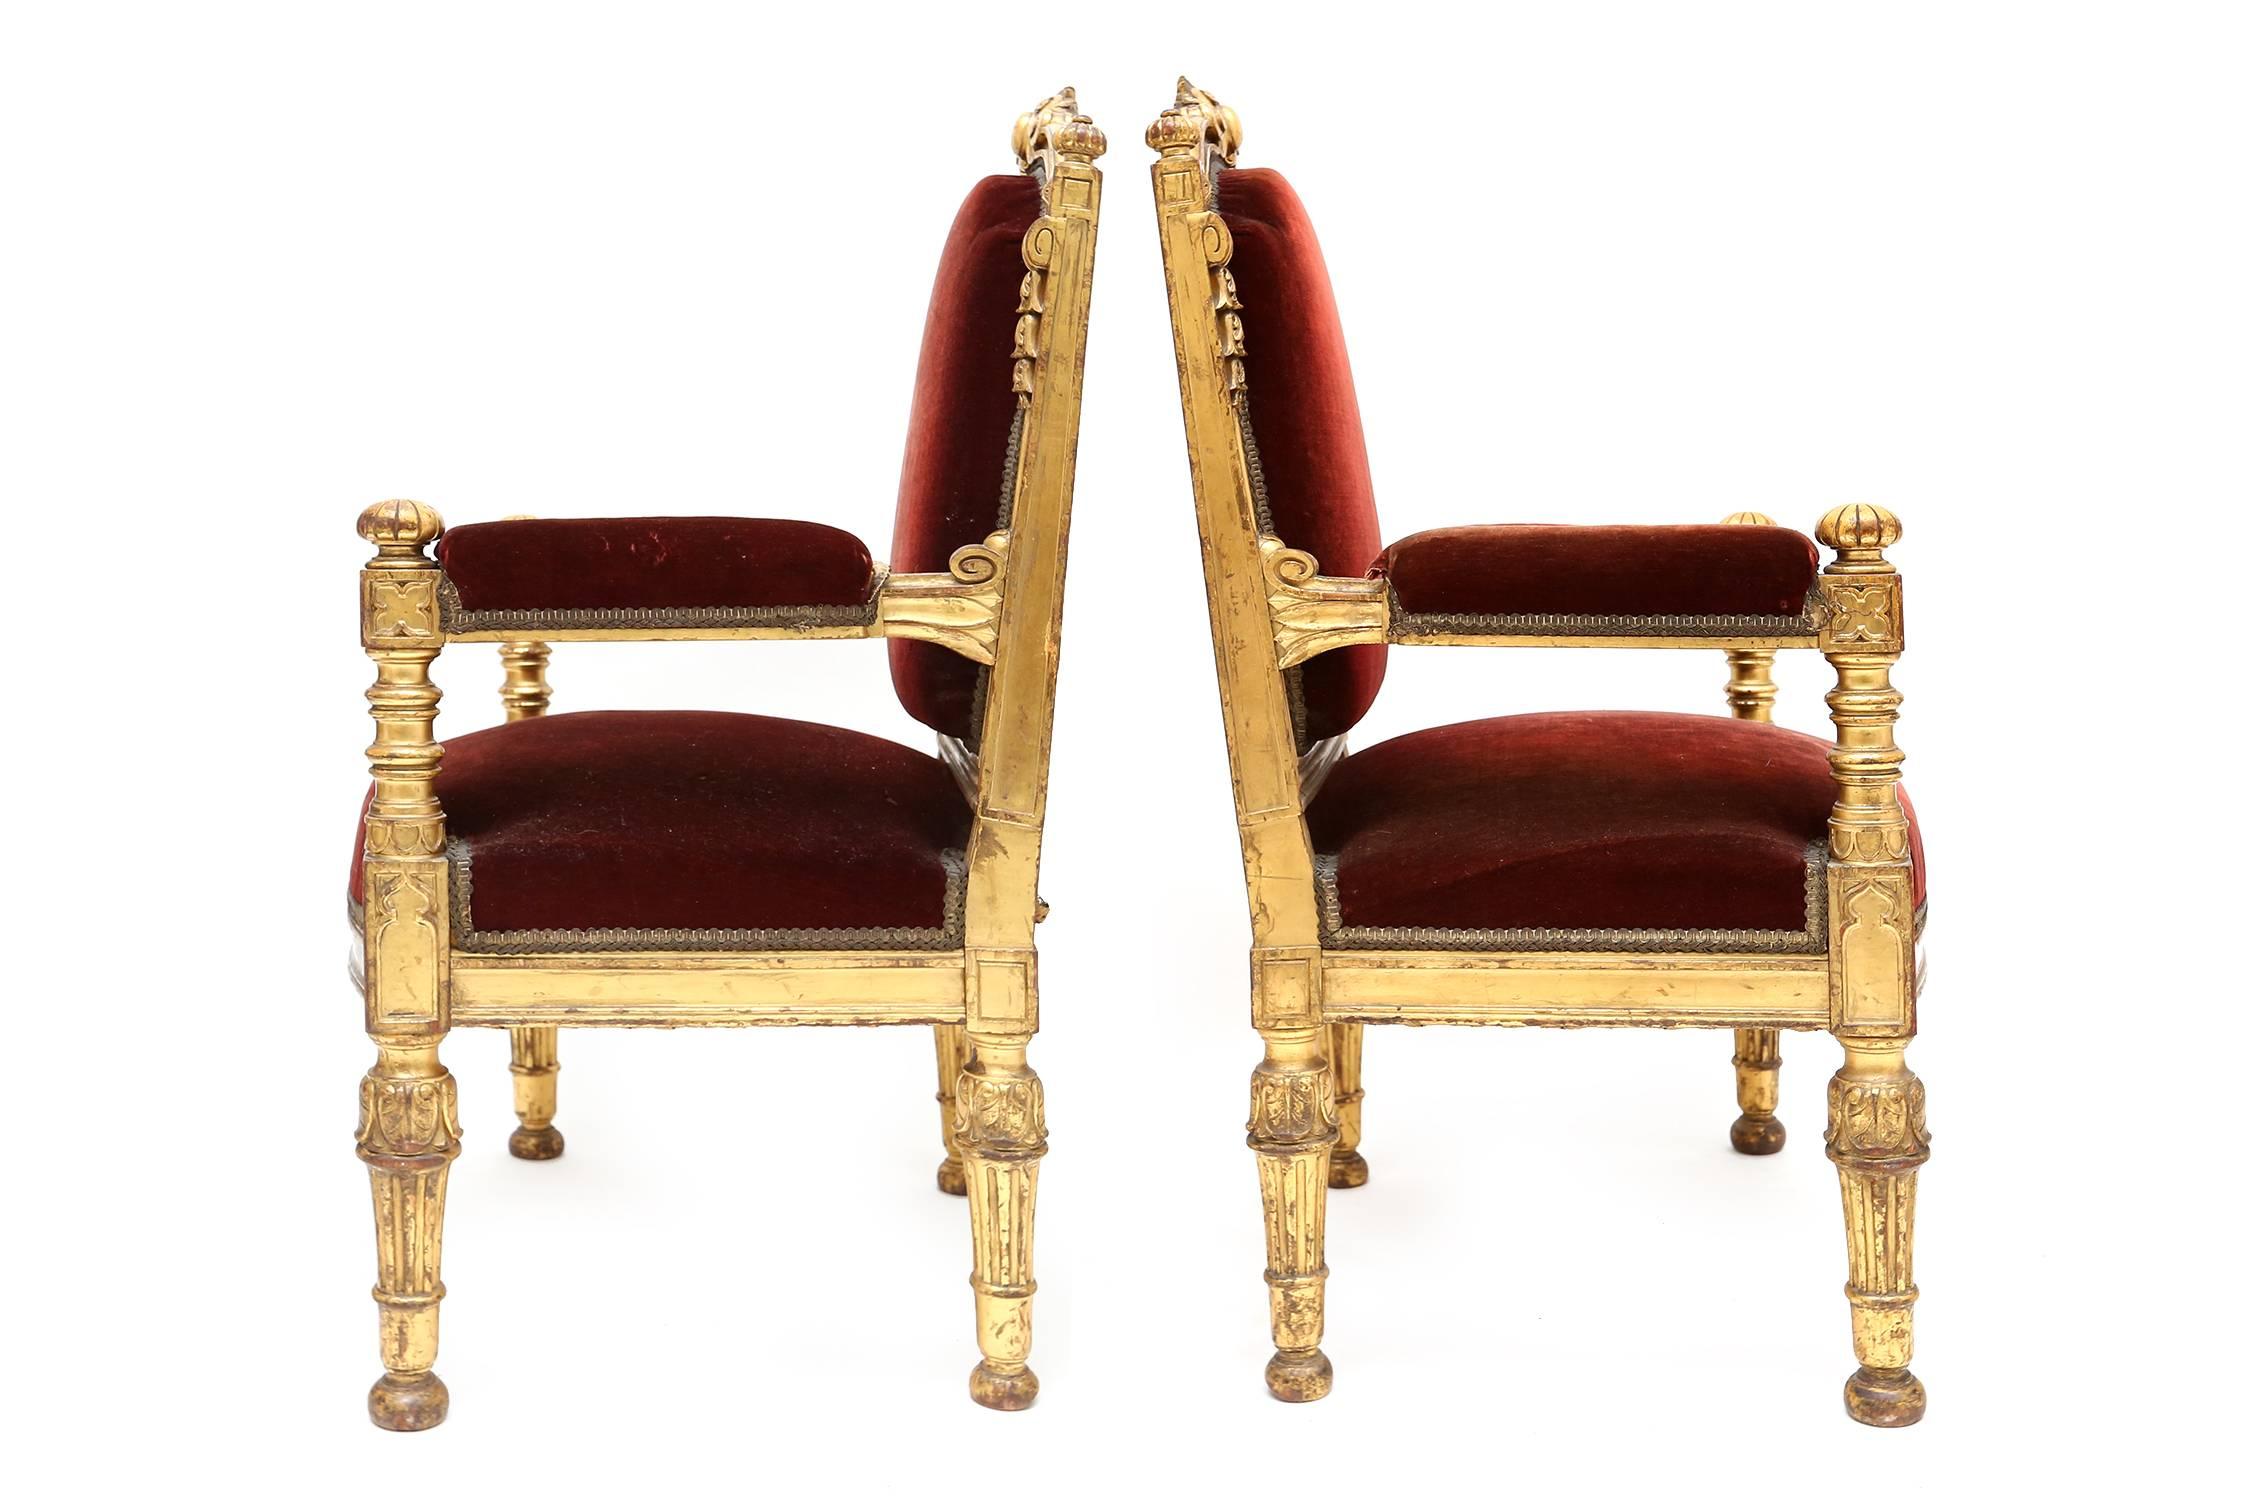 Golden throne chairs in 
burgundy red velvet,
19th century, Italy.
Would fit well in a hollywood regency inspired eclectic interior


  